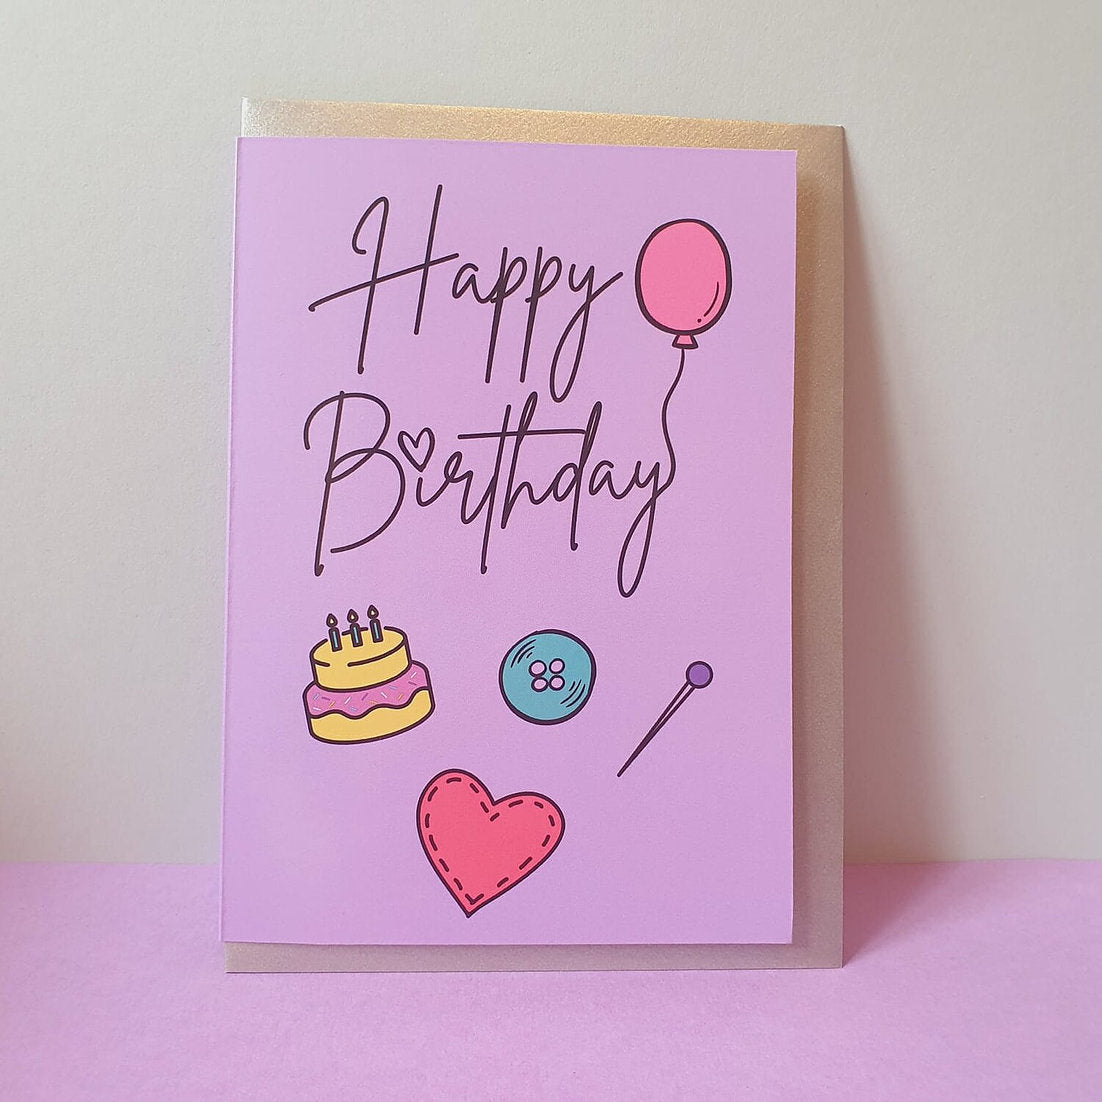 "HAPPY BIRTHDAY" Sewing Themed Greeting Card - Sew Anonymous